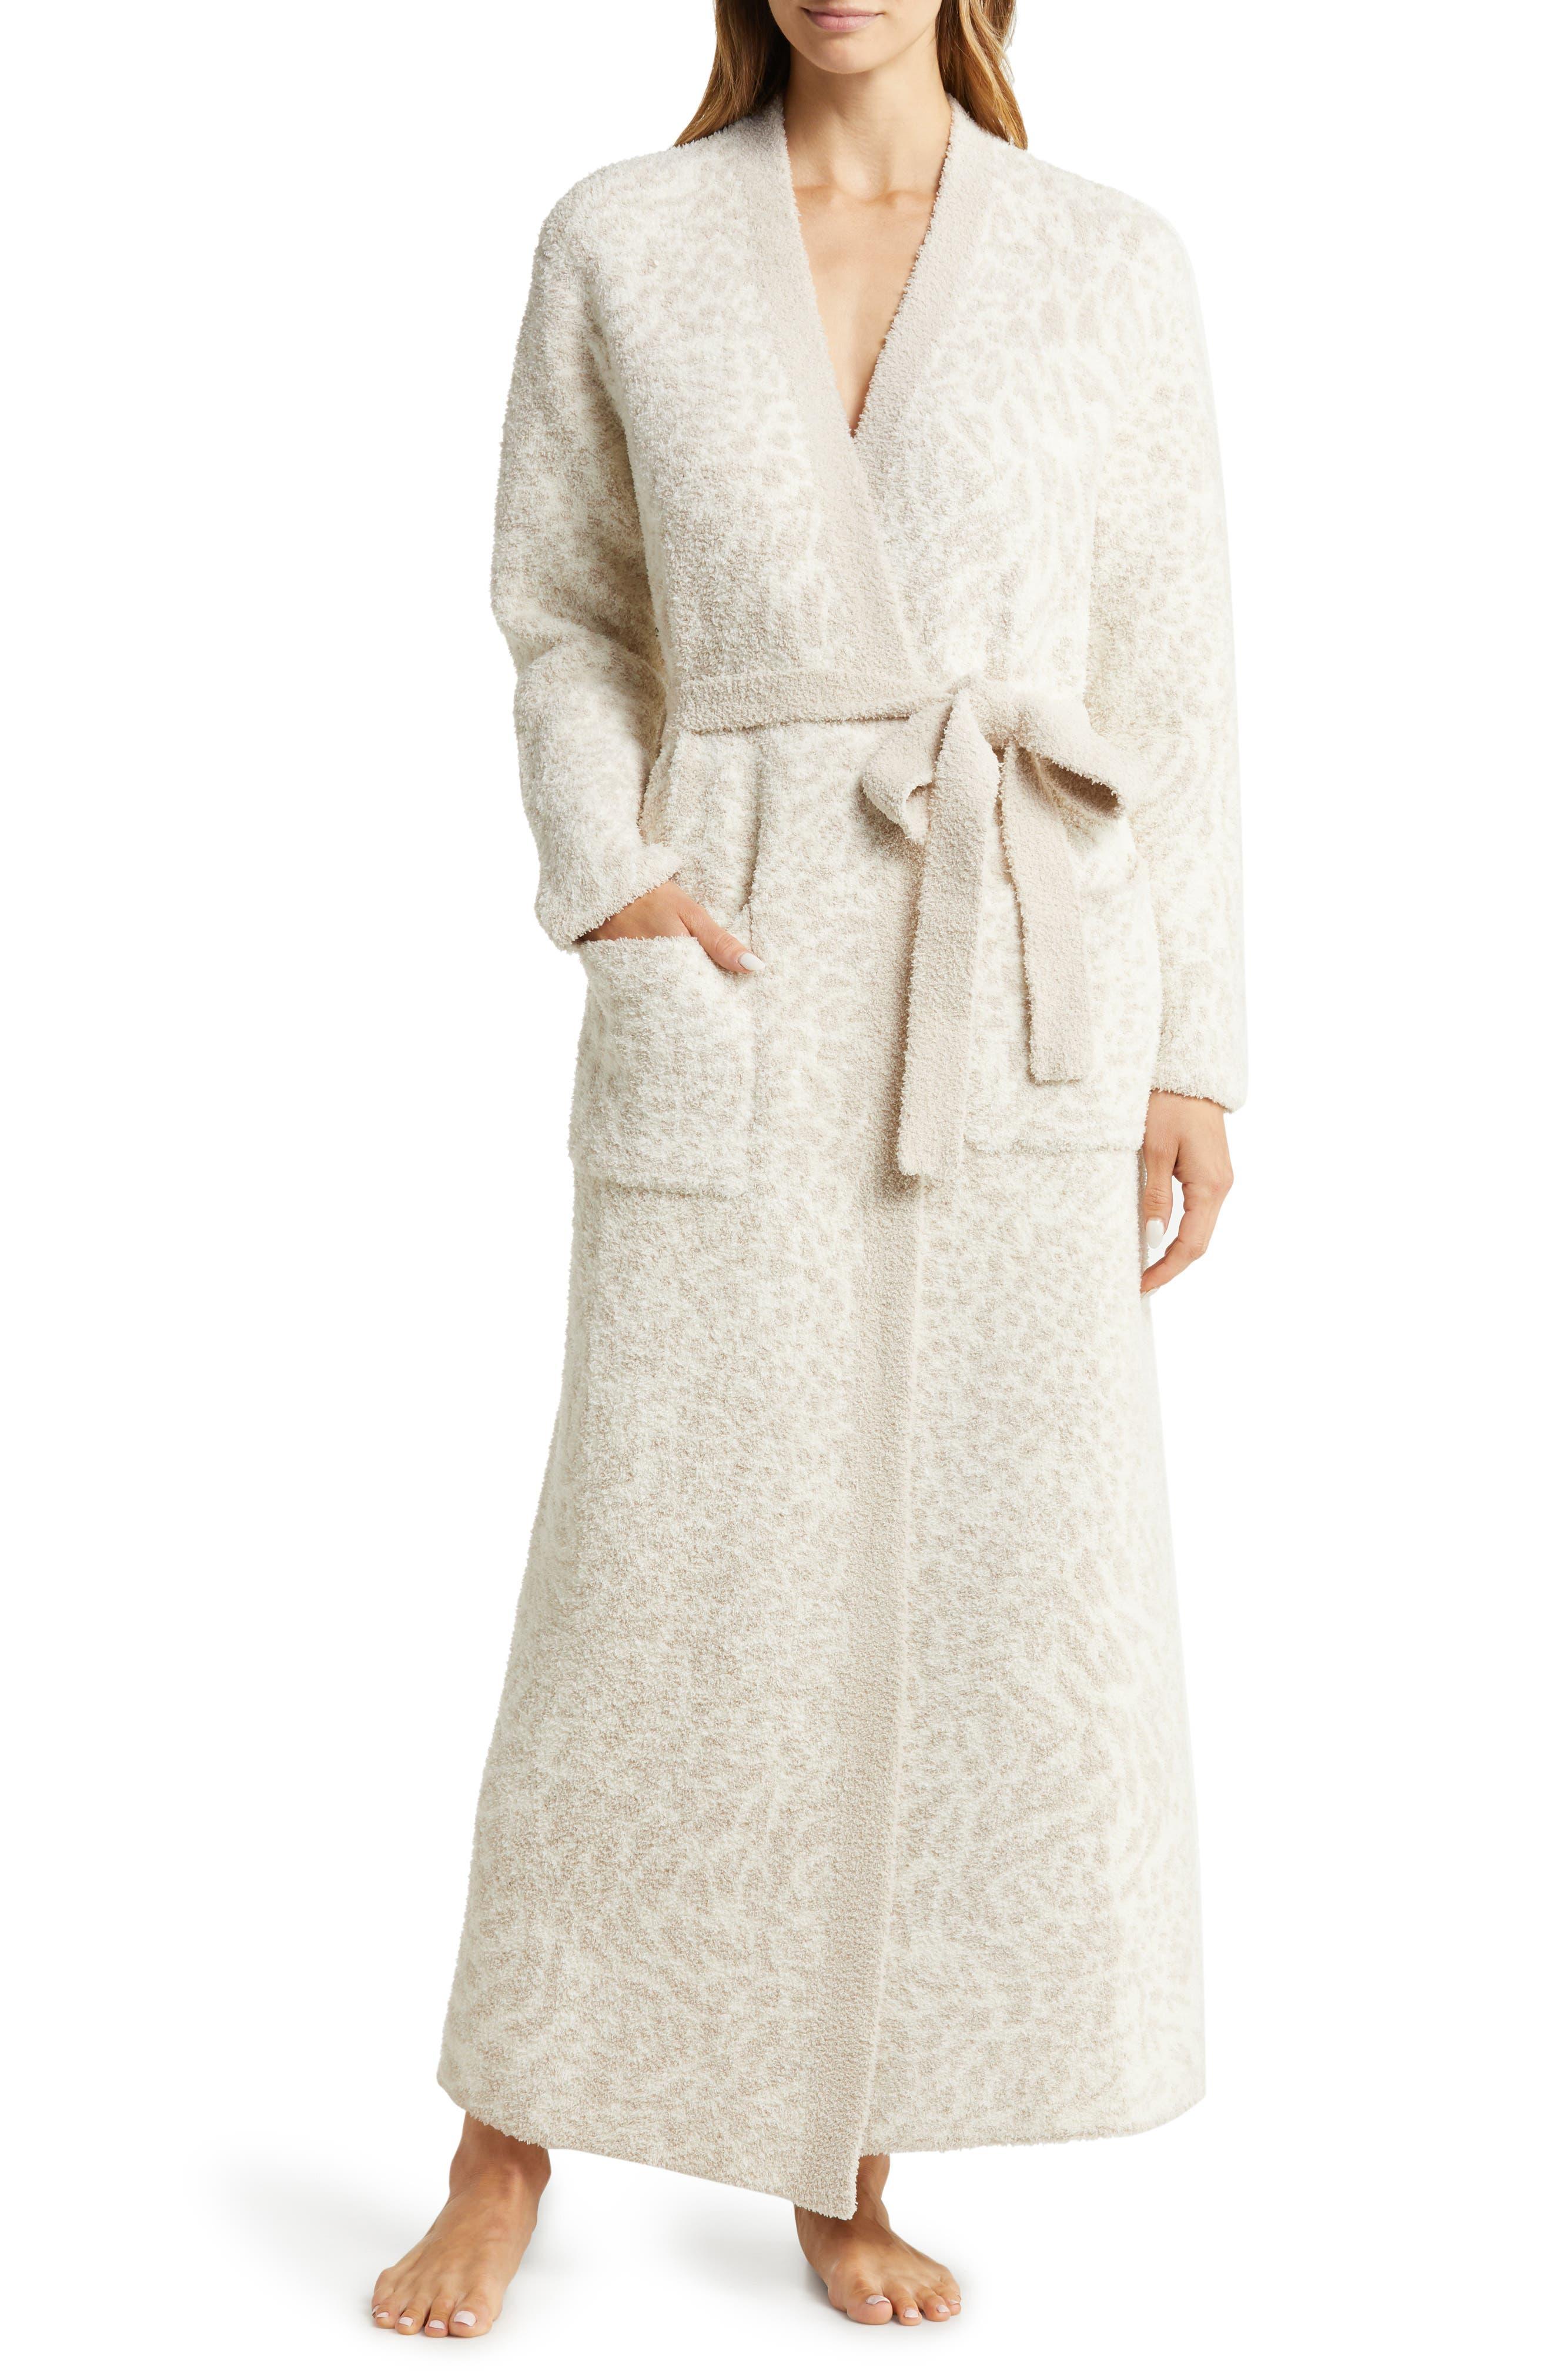 Barefoot Dreams Cozychictm Wilderness Long Robe in Natural | Lyst